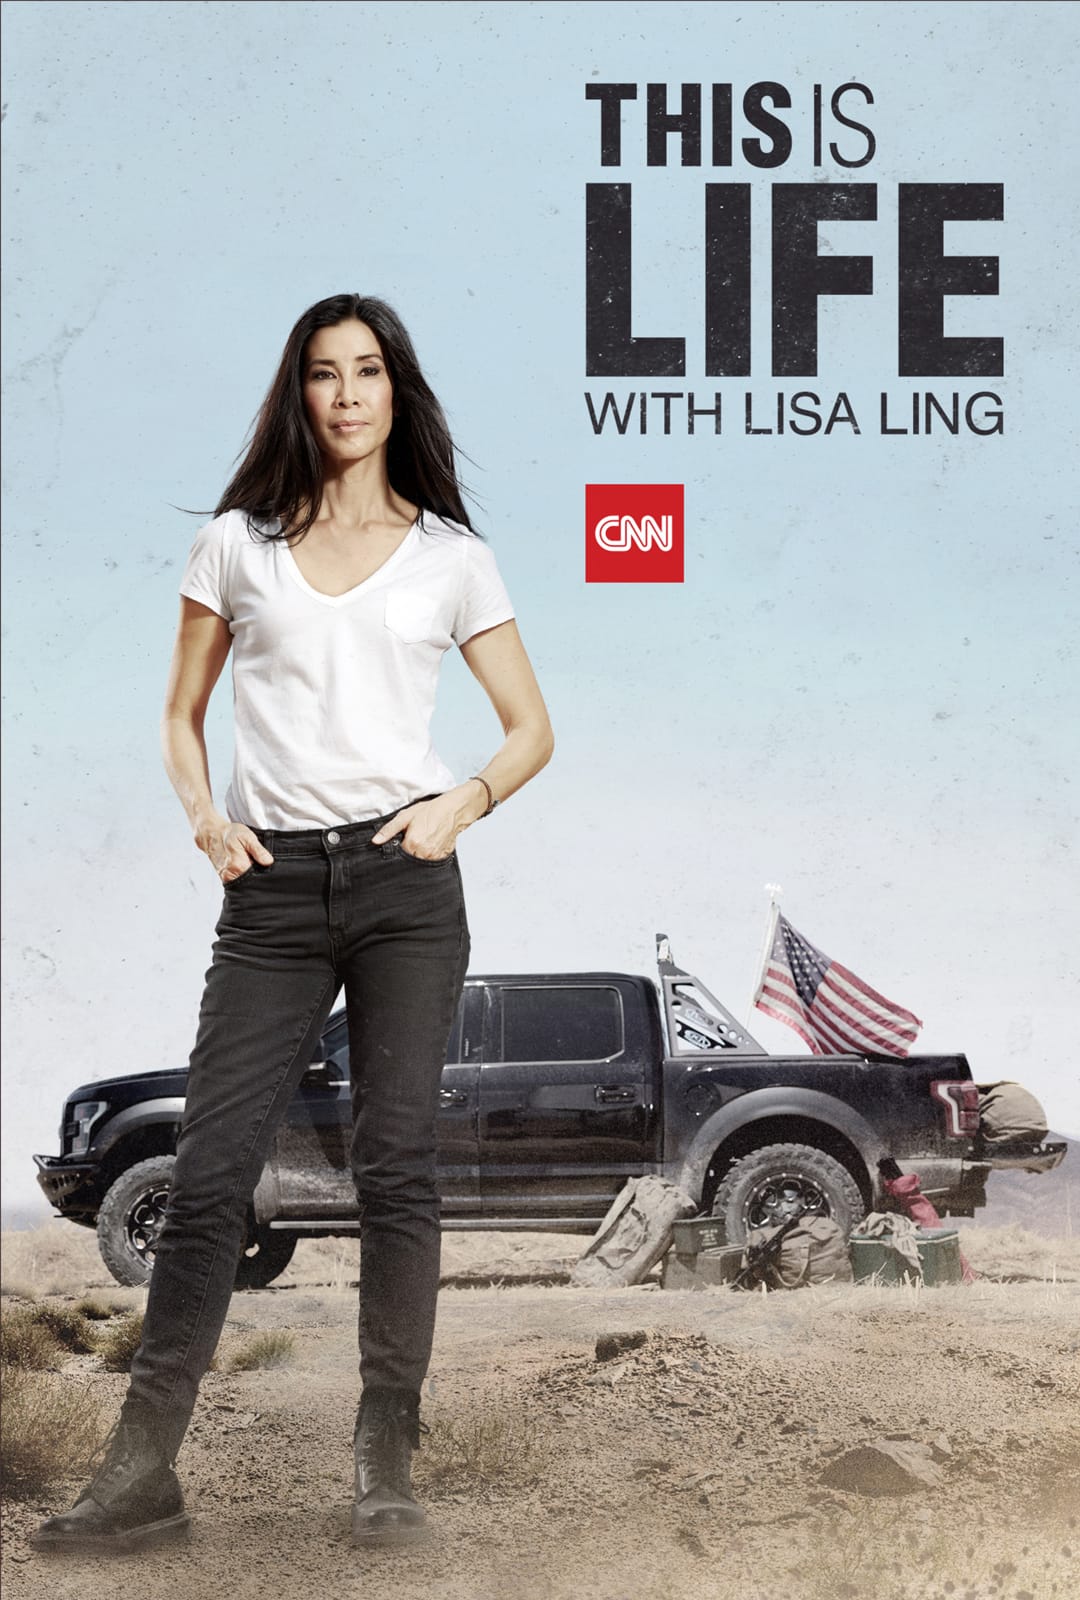 Toddler Daughter Meth Training Porn - This is Life with Lisa Ling - CNN Creative Marketing